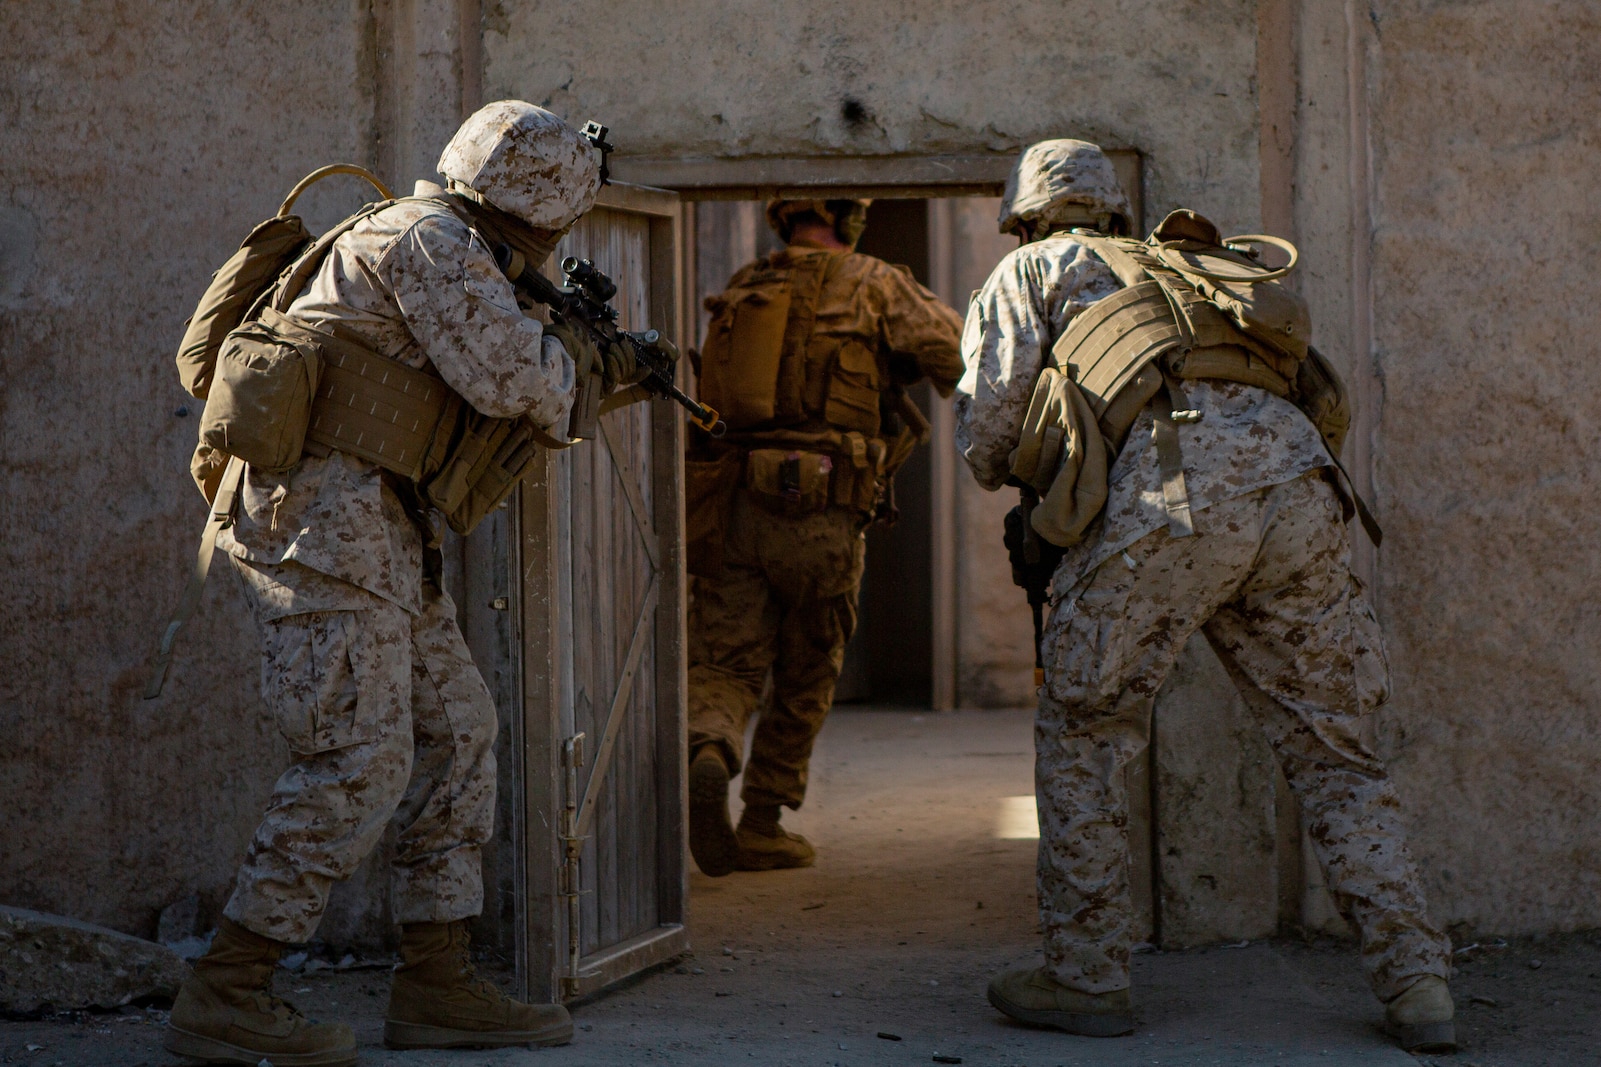 U.S. Marines with 1st Intelligence Battalion, I Marine Expeditionary Force Information Group, clear a building during a CounterIntelligence and Human Intelligence Tactical Exercise at Marine Corps Base Camp Pendleton, California, Oct. 16, 2020. The CI/HUMINT TACEX integrates infantry and intelligence Marines to improve proficiency and readiness when deployed.. (U.S. Marine Corps photo by Lance Cpl. Ian M. Simmons)